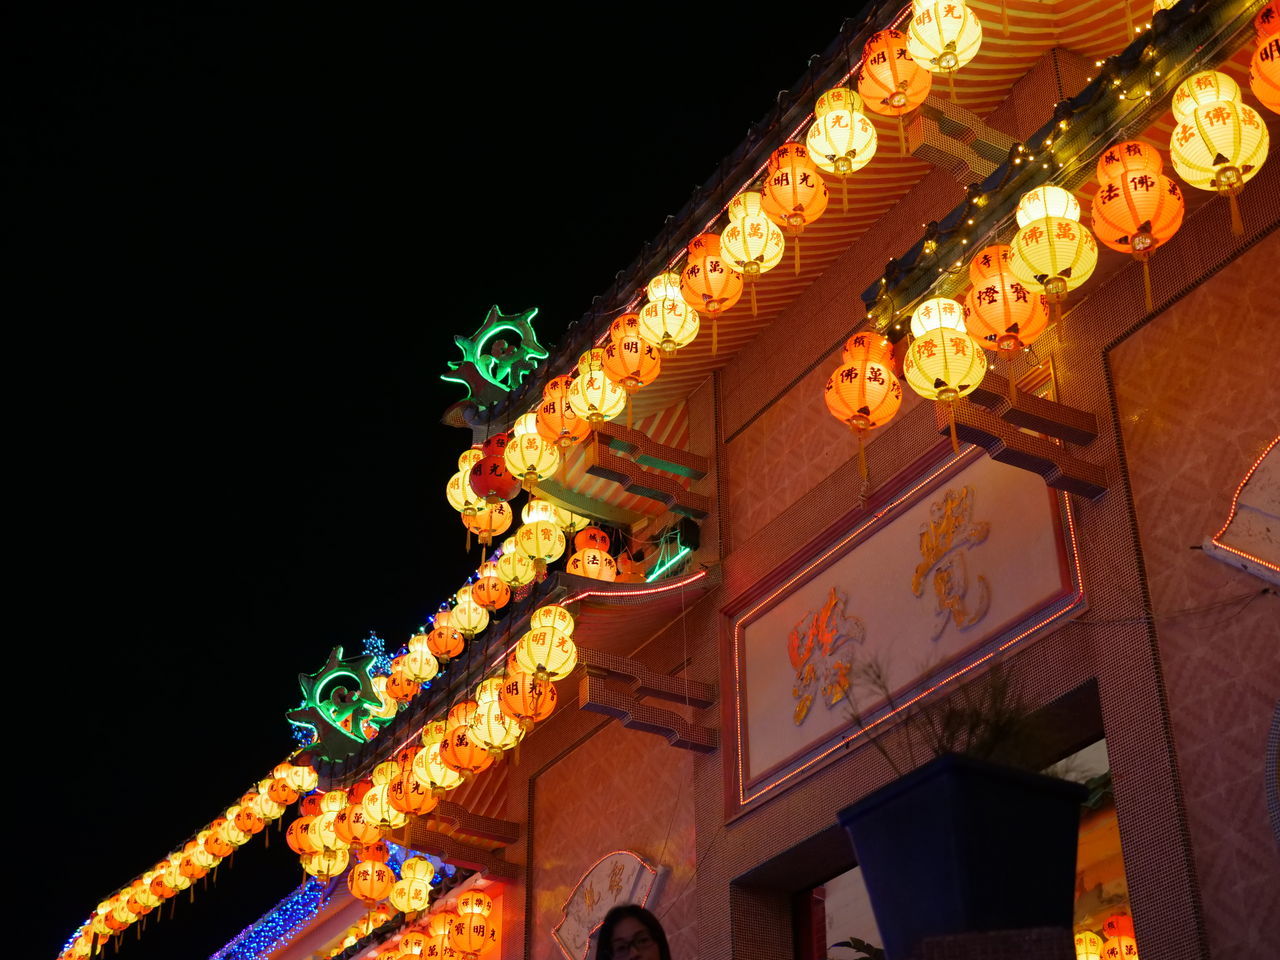 illuminated, lighting equipment, architecture, night, lantern, low angle view, chinese lantern, decoration, chinese lantern festival, built structure, chinese new year, tradition, celebration, no people, festival, building exterior, event, holiday, traditional festival, hanging, travel destinations, building, nature, religion, outdoors, roof, belief